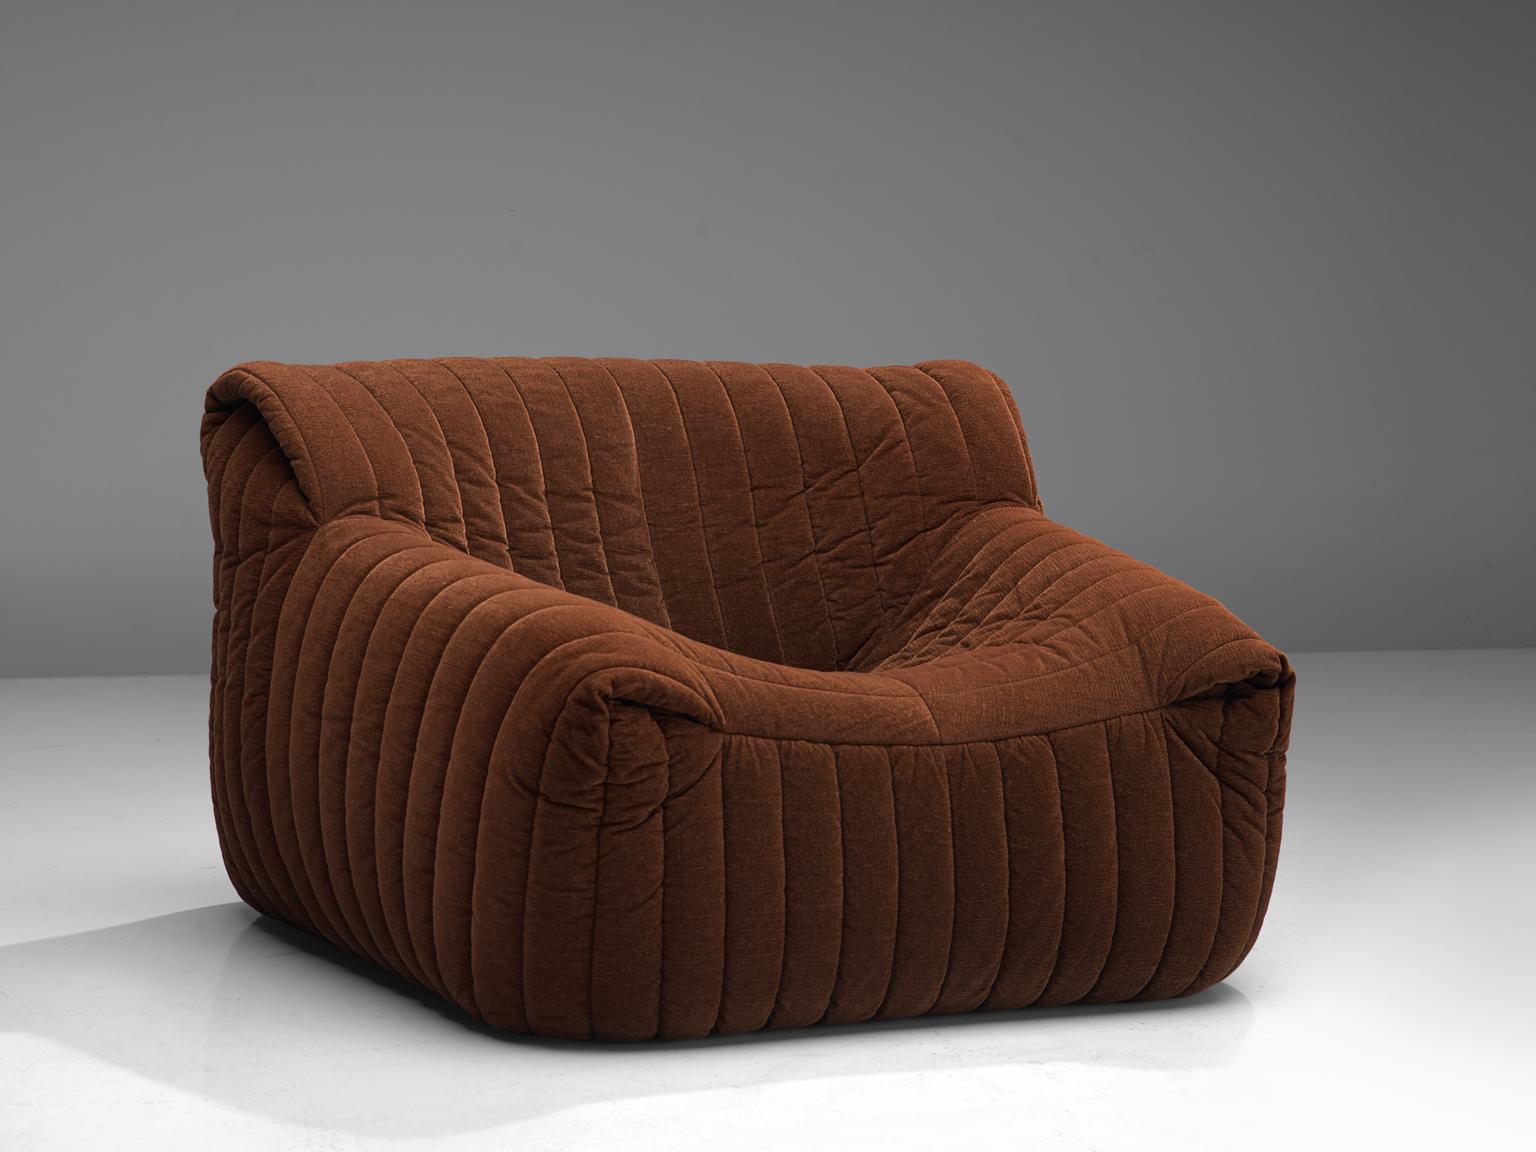 Annie Hiéronimus for Cinna (Ligne Roset), lounge chair model 'Sandra', fabric, France, circa 1977.

This comfortable and grand 'Sandra' lounge chair, is designed by Annie Hiéronimus. 
This model features a solid base with a rounded, bulky seat